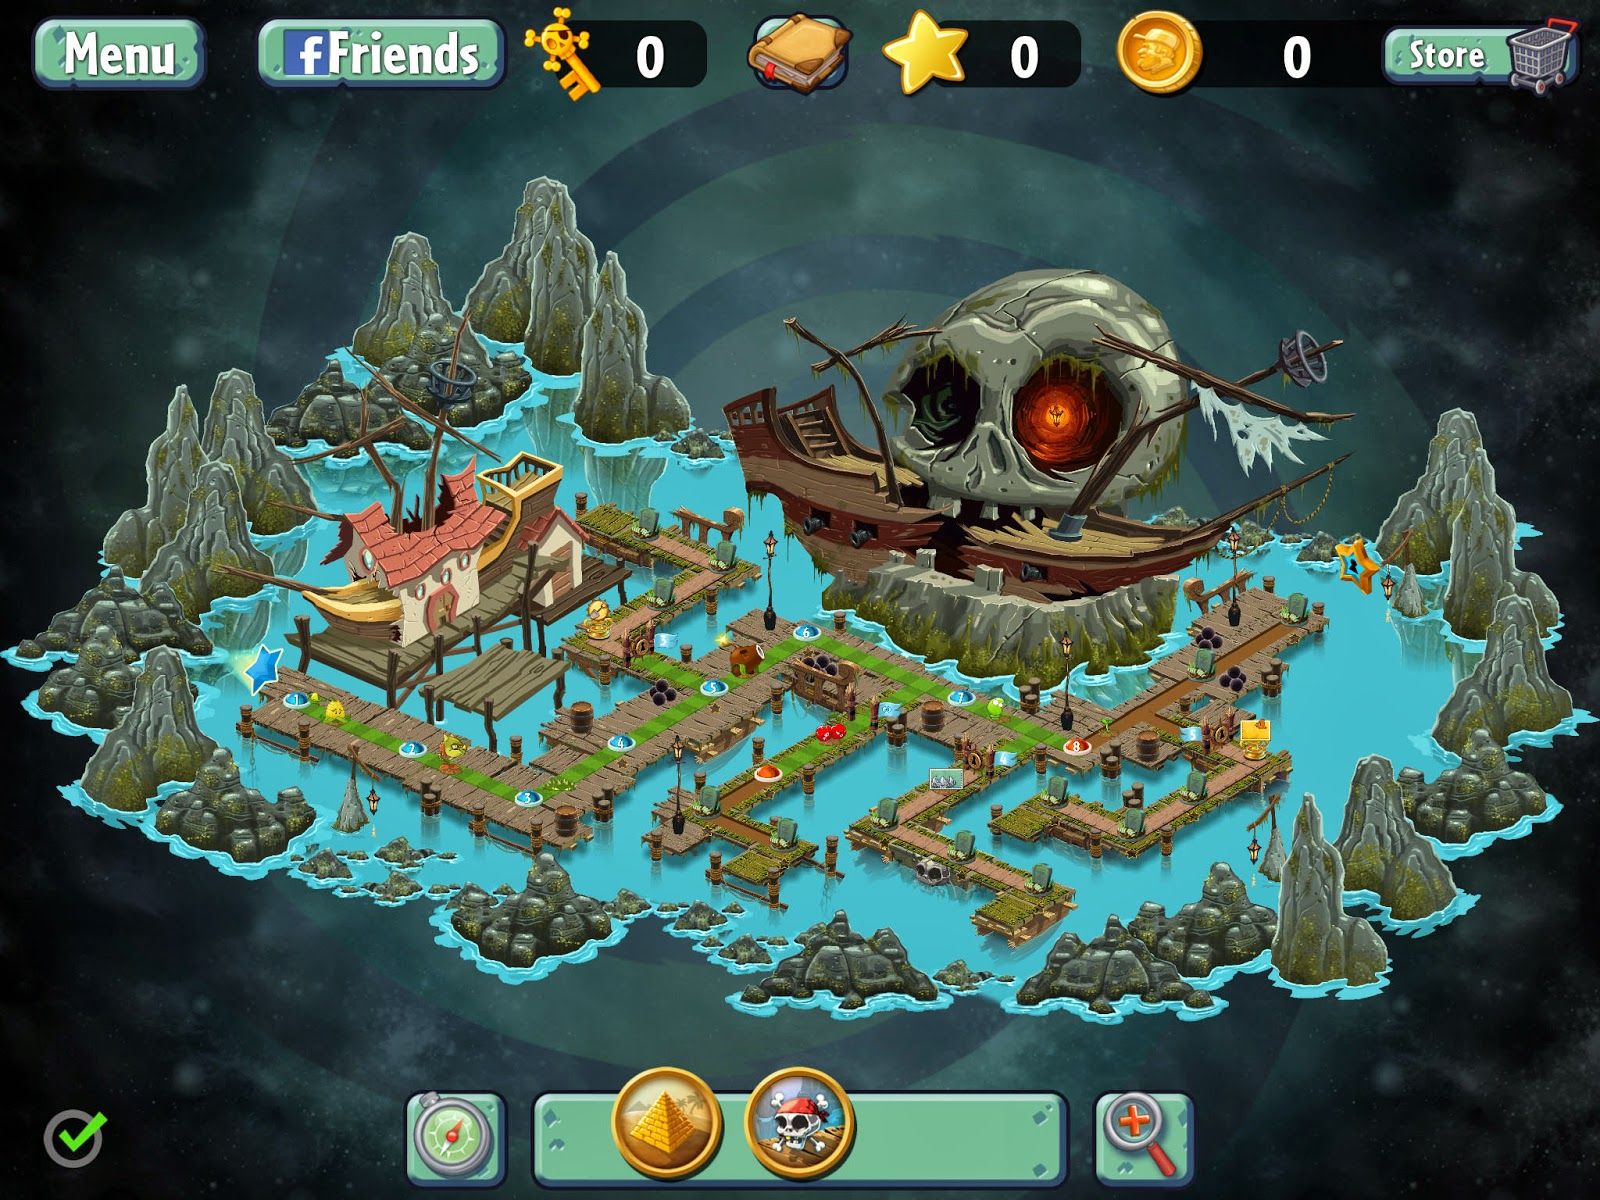 Gamasutra: Michail Katkoff's Blog Plants vs. Zombies 2 Can't Make It To